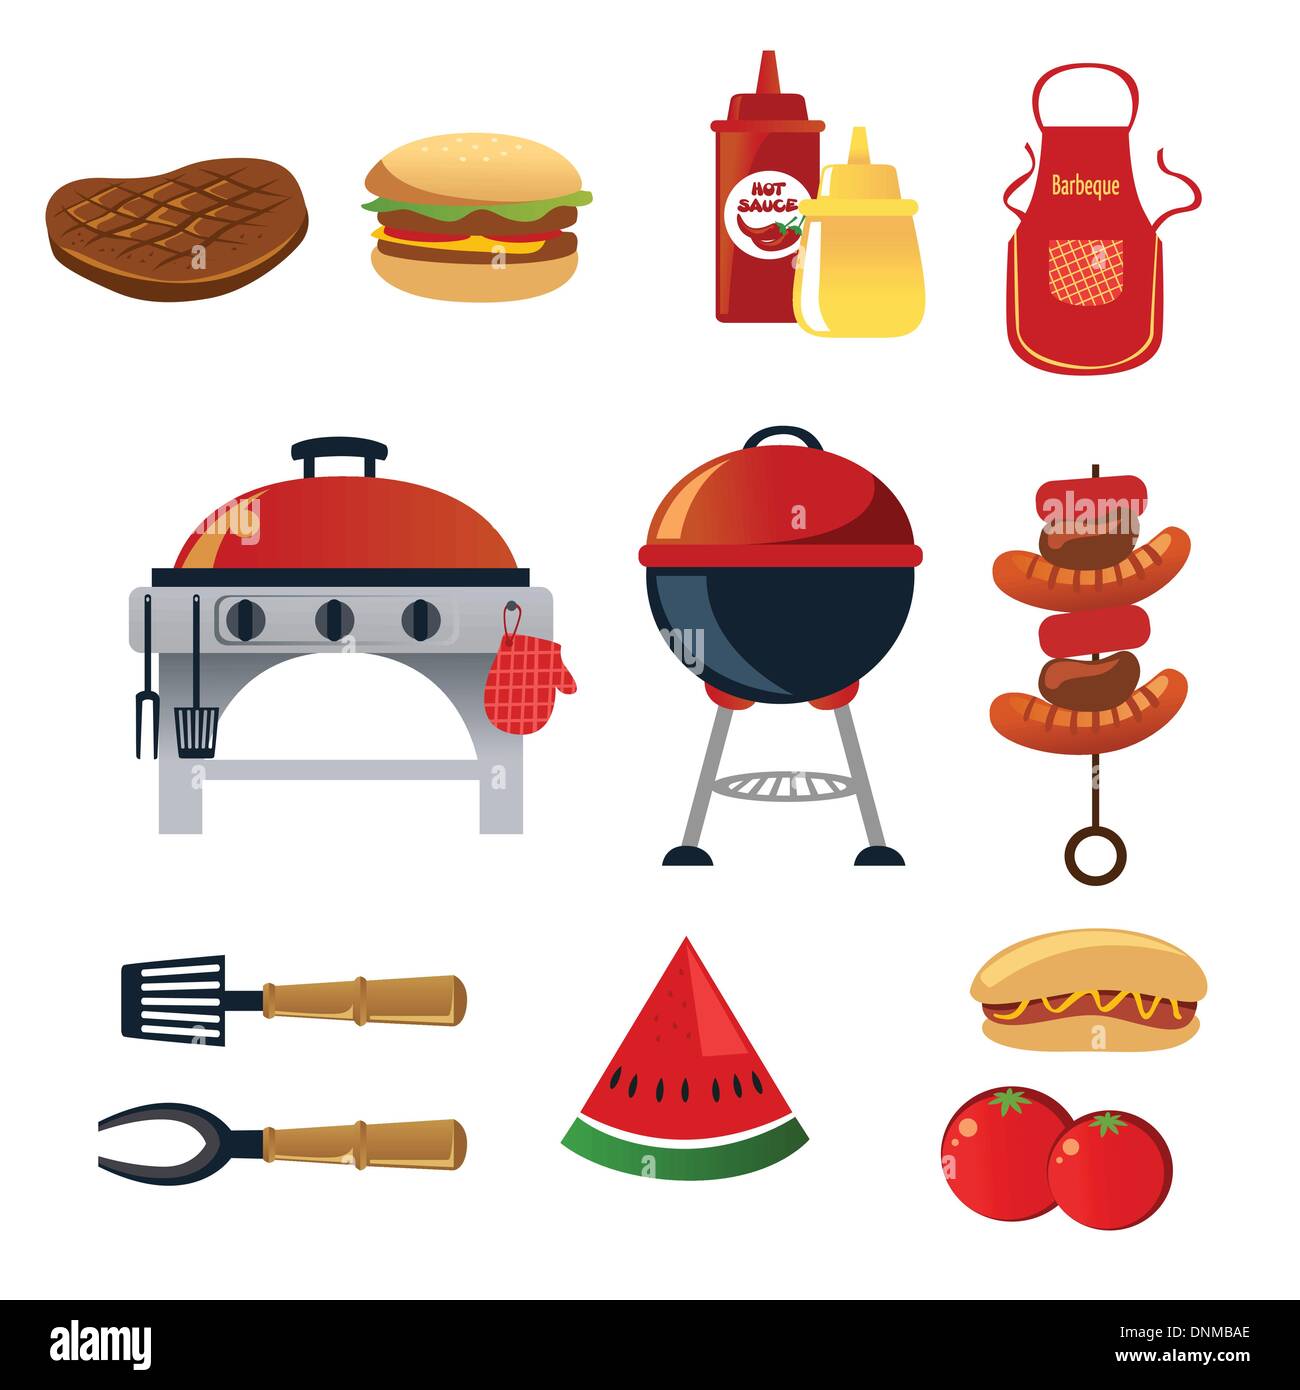 A vector illustration of barbeque icon sets Stock Vector